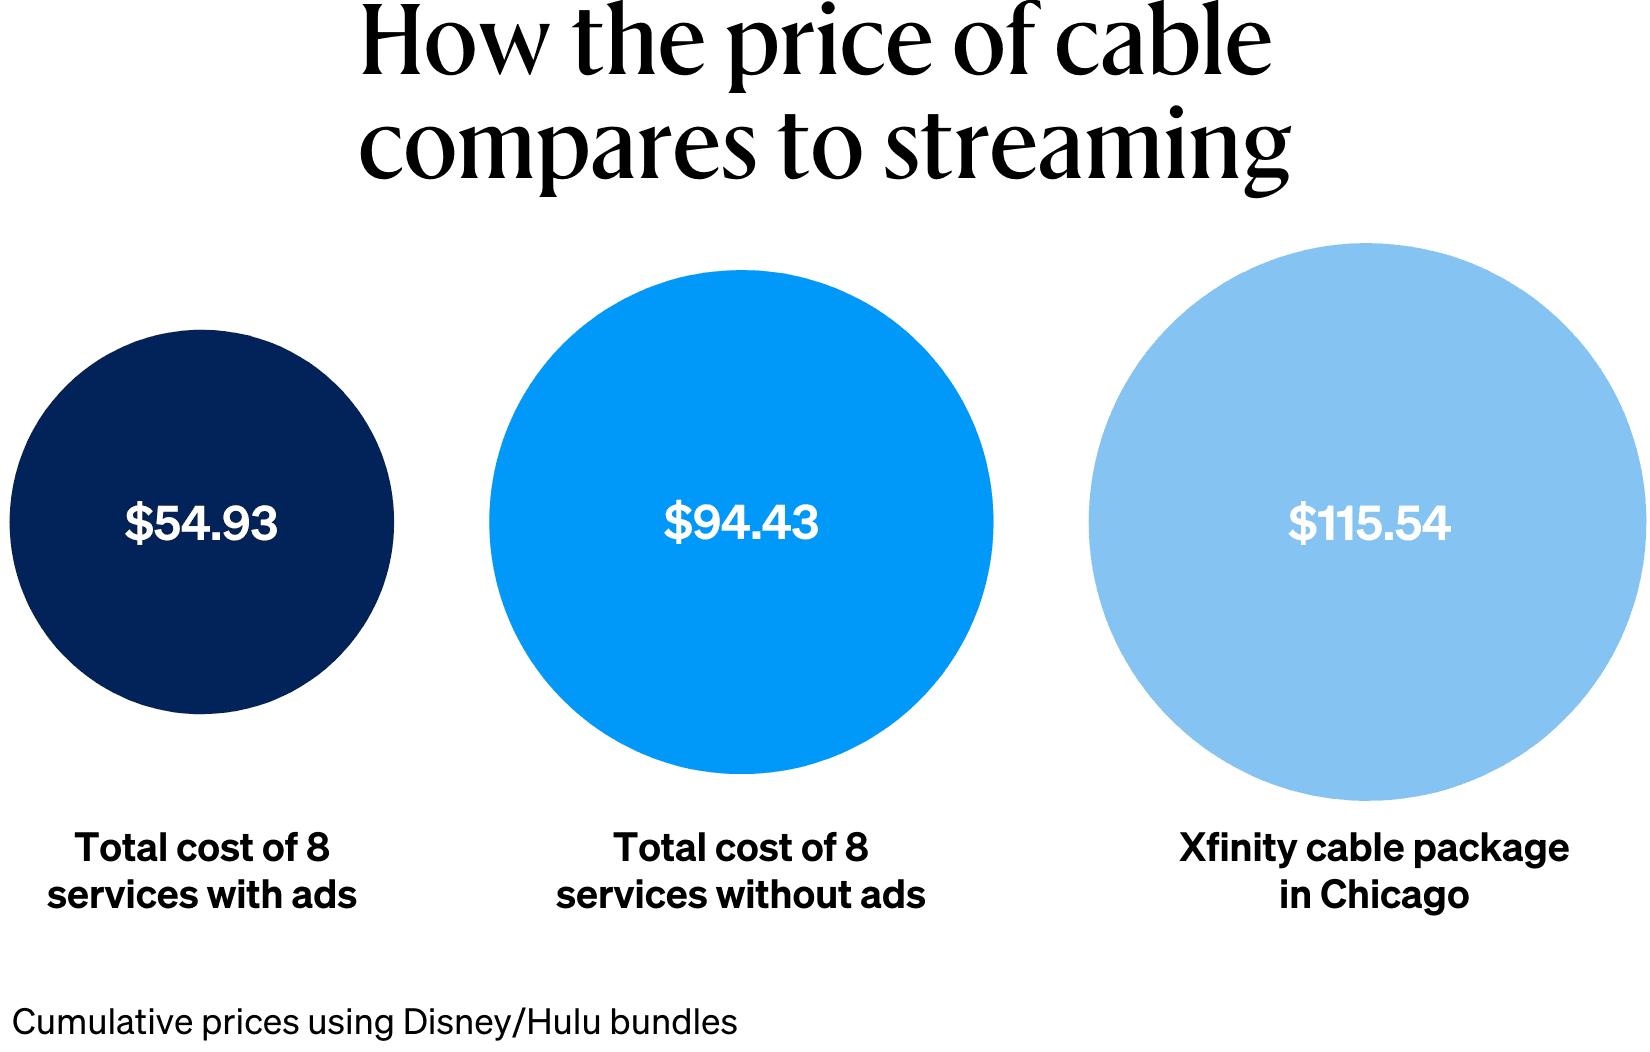 How the price of cable compares to streaming. Compares the total cost of 8 services with ads, total cost of 8 services without ads, and Xfinity cable package in Chicago in three circles in various shades of blue.